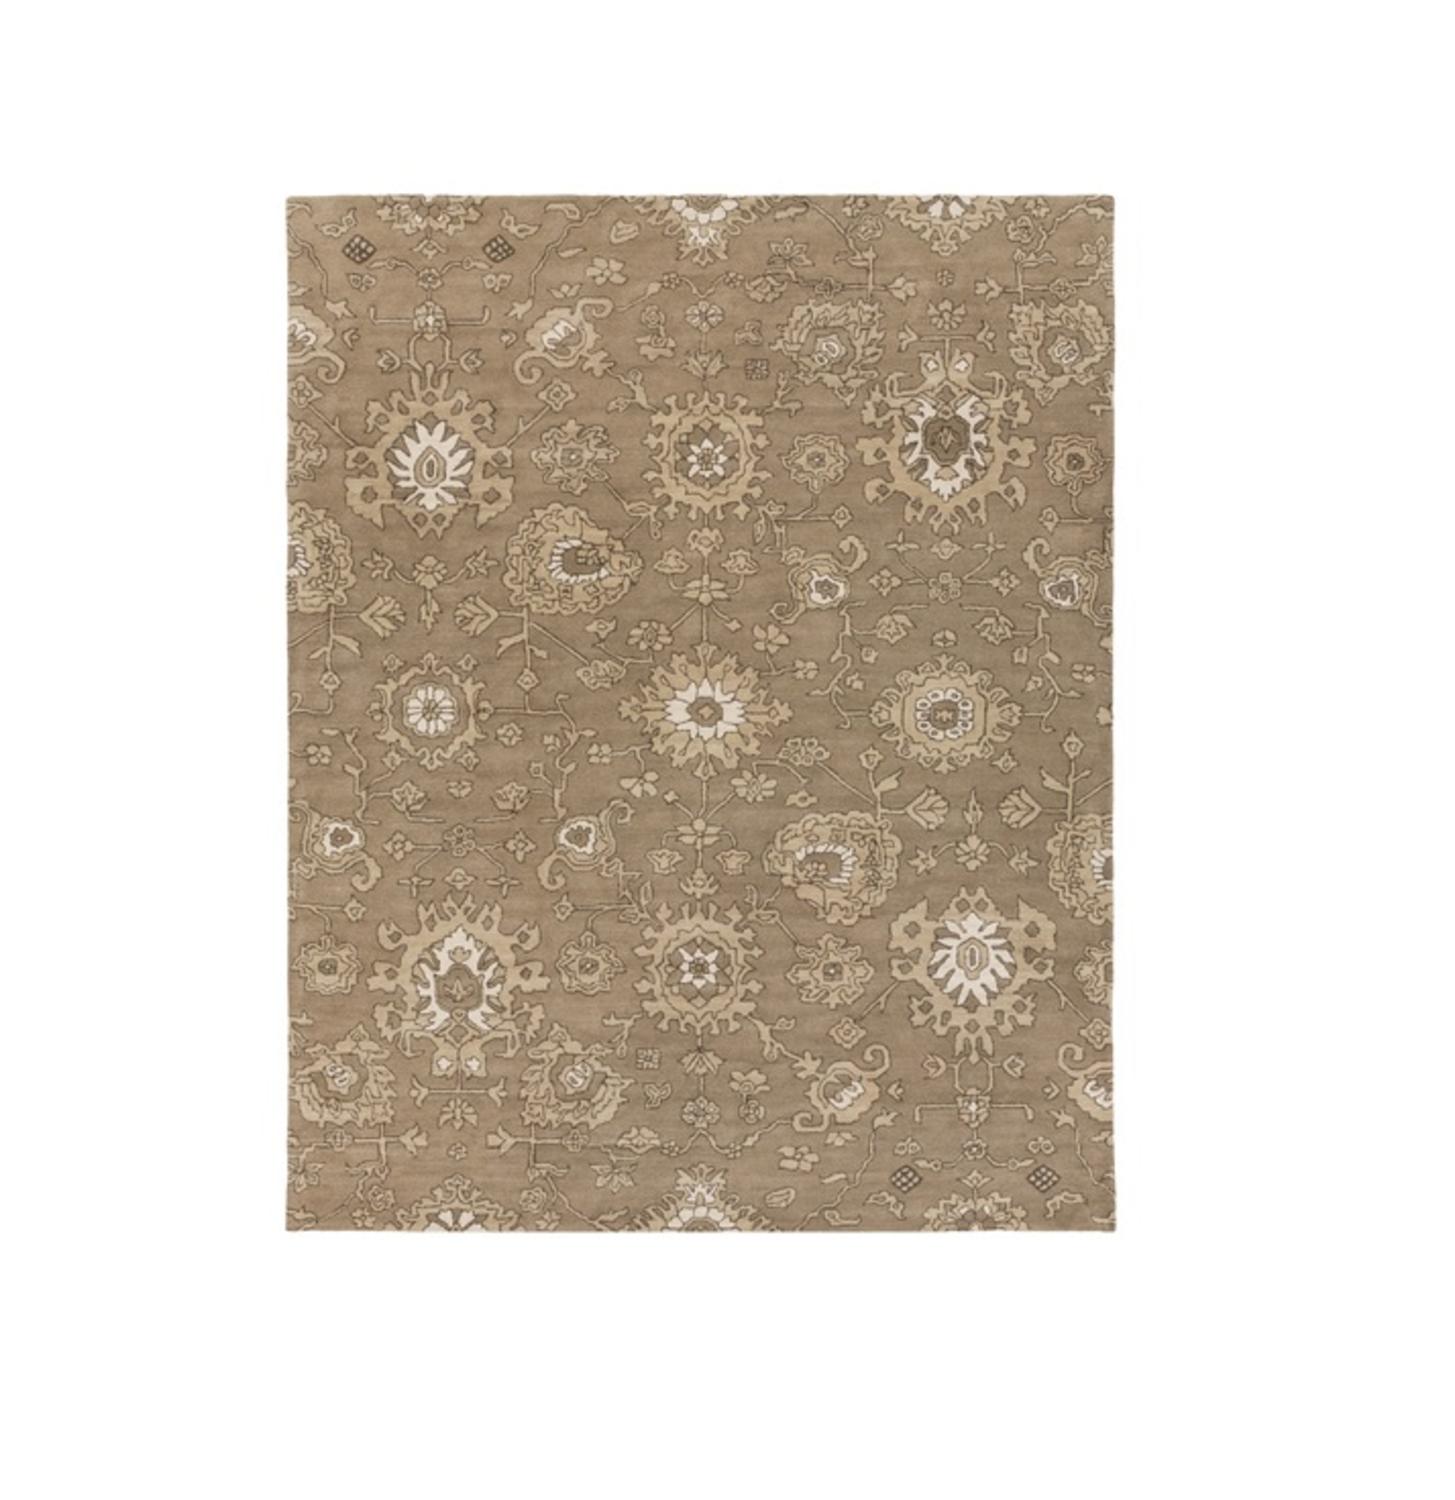 Diva At Home 8' x 10' Floral Constellations Taupe Gray and Light Beige Hand Tufted Wool Area Throw Rug